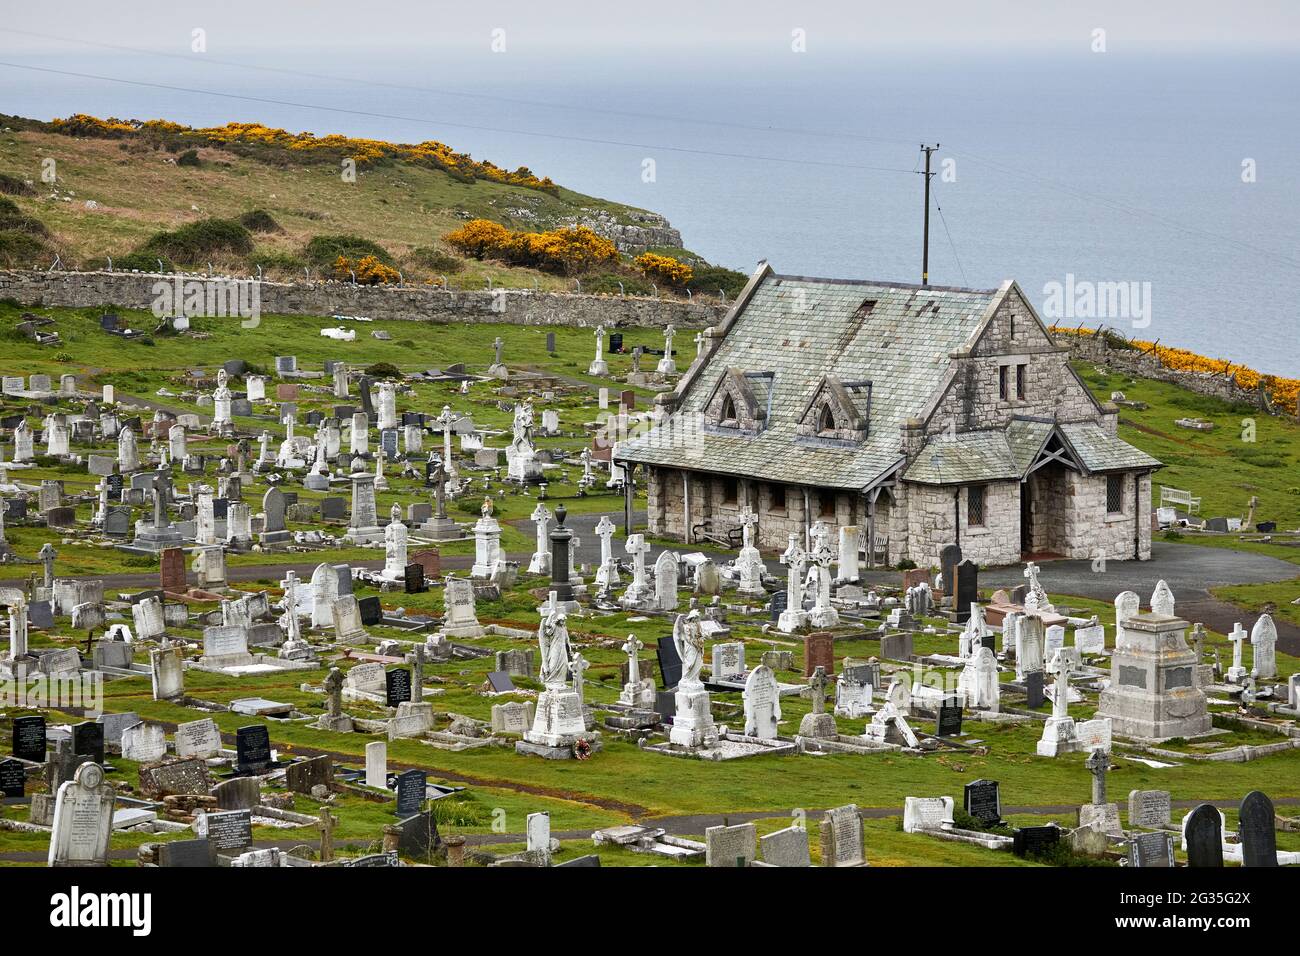 Coastal seaside resort town Llandudno North Wales Great Orme Cemetery Chapel looking out over the Irish Sea Stock Photo